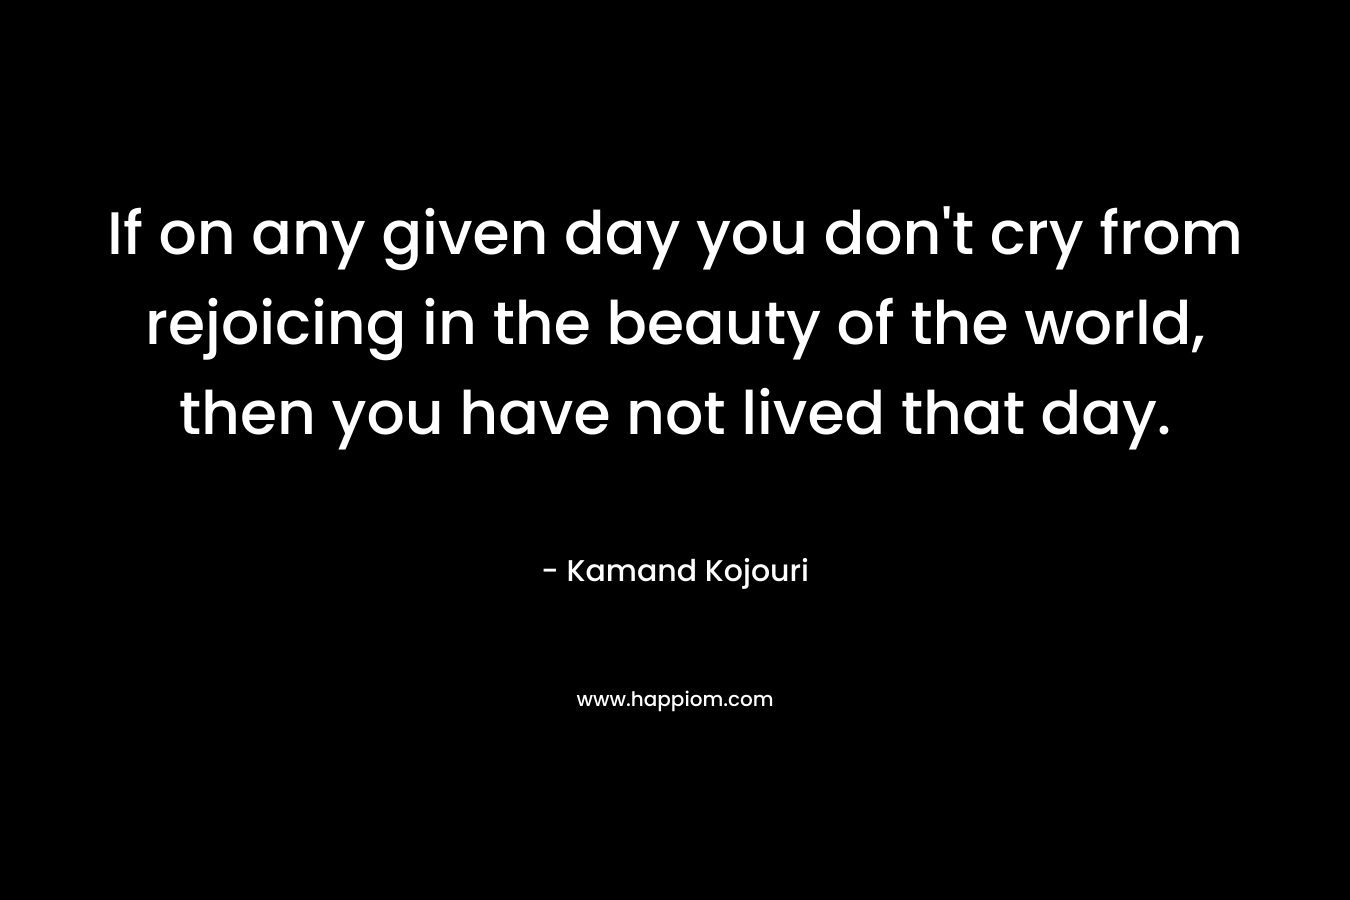 If on any given day you don’t cry from rejoicing in the beauty of the world, then you have not lived that day. – Kamand Kojouri